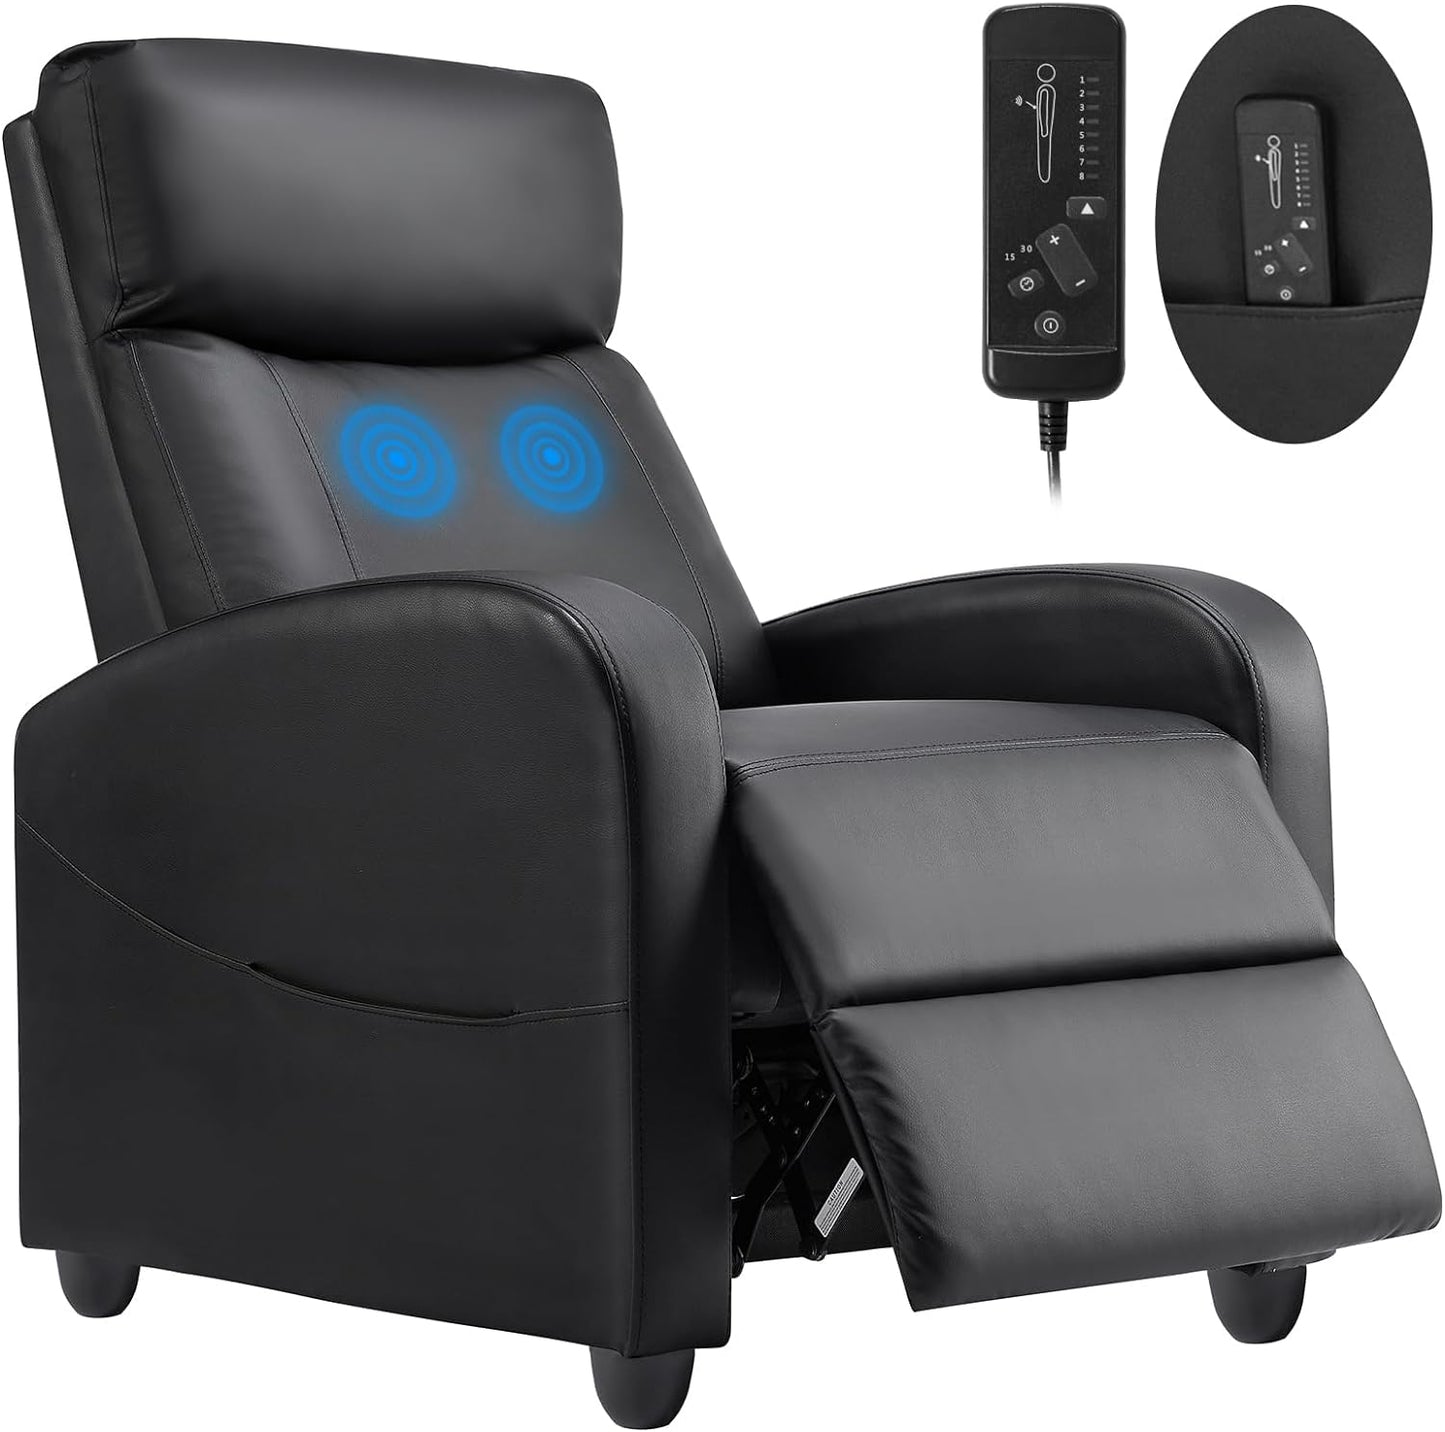 Recliner Chair Massage Reclining for Adults, Comfortable PU Leather Recliner Sofa Adjustable Home Theater Seating Lounge with Padded Seat Backrest, Small Recliners for Living Room, Bedroom (Black)